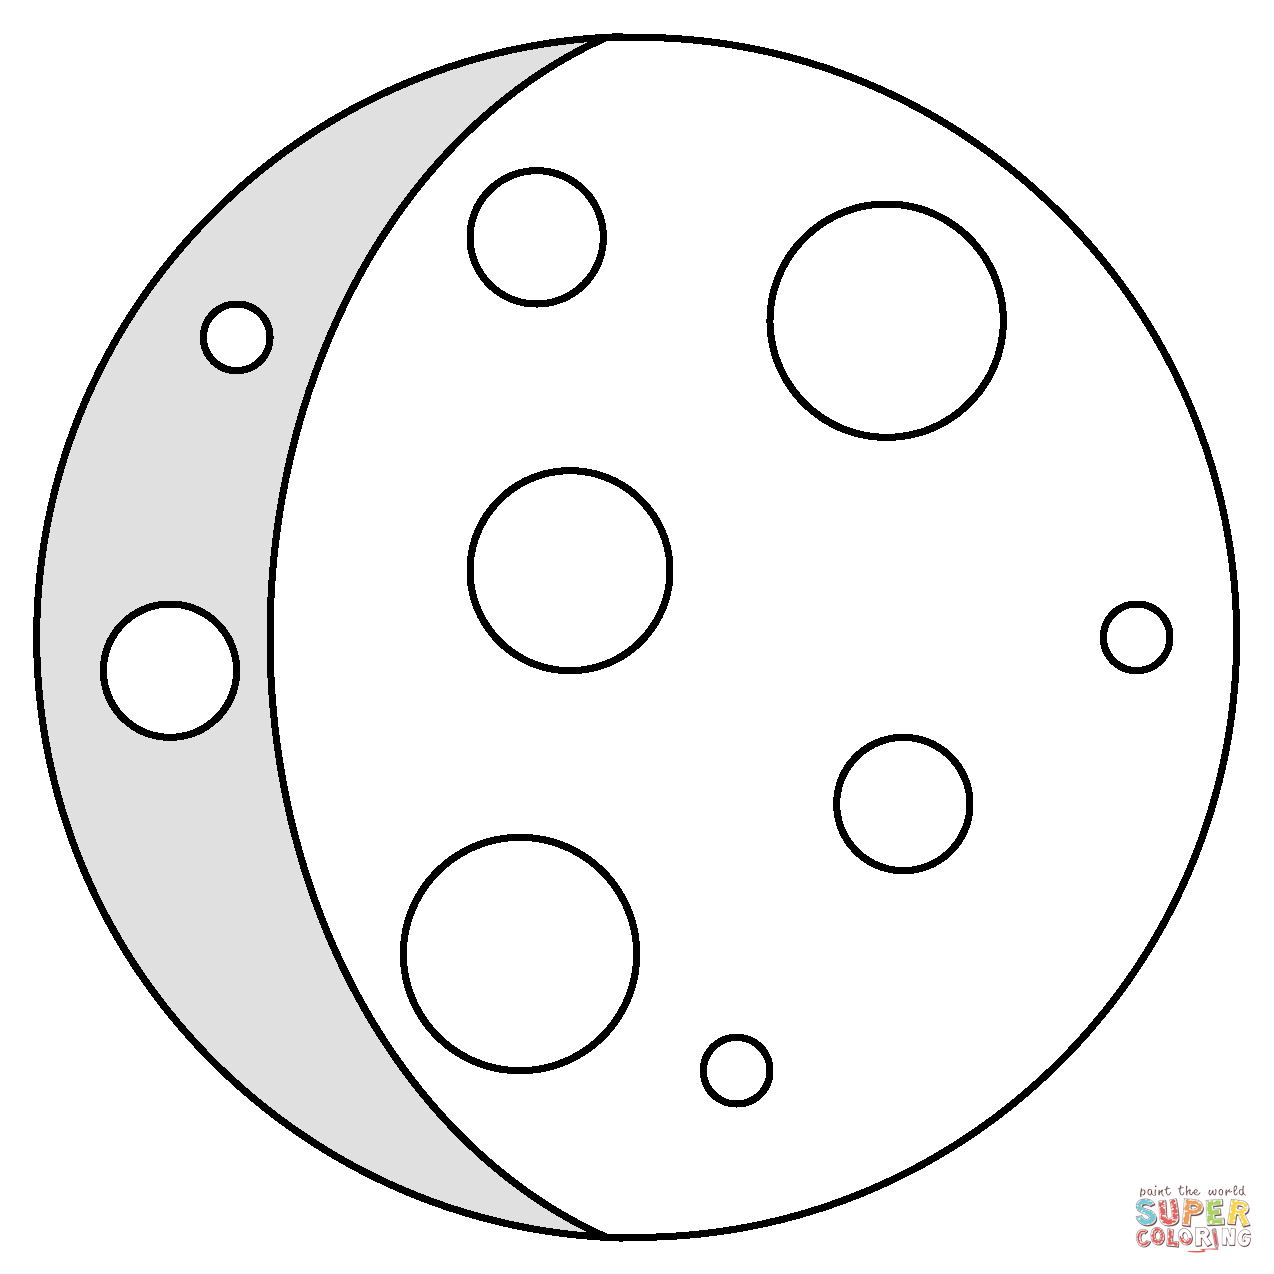 Waxing gibbous moon emoji coloring page free printable coloring pages